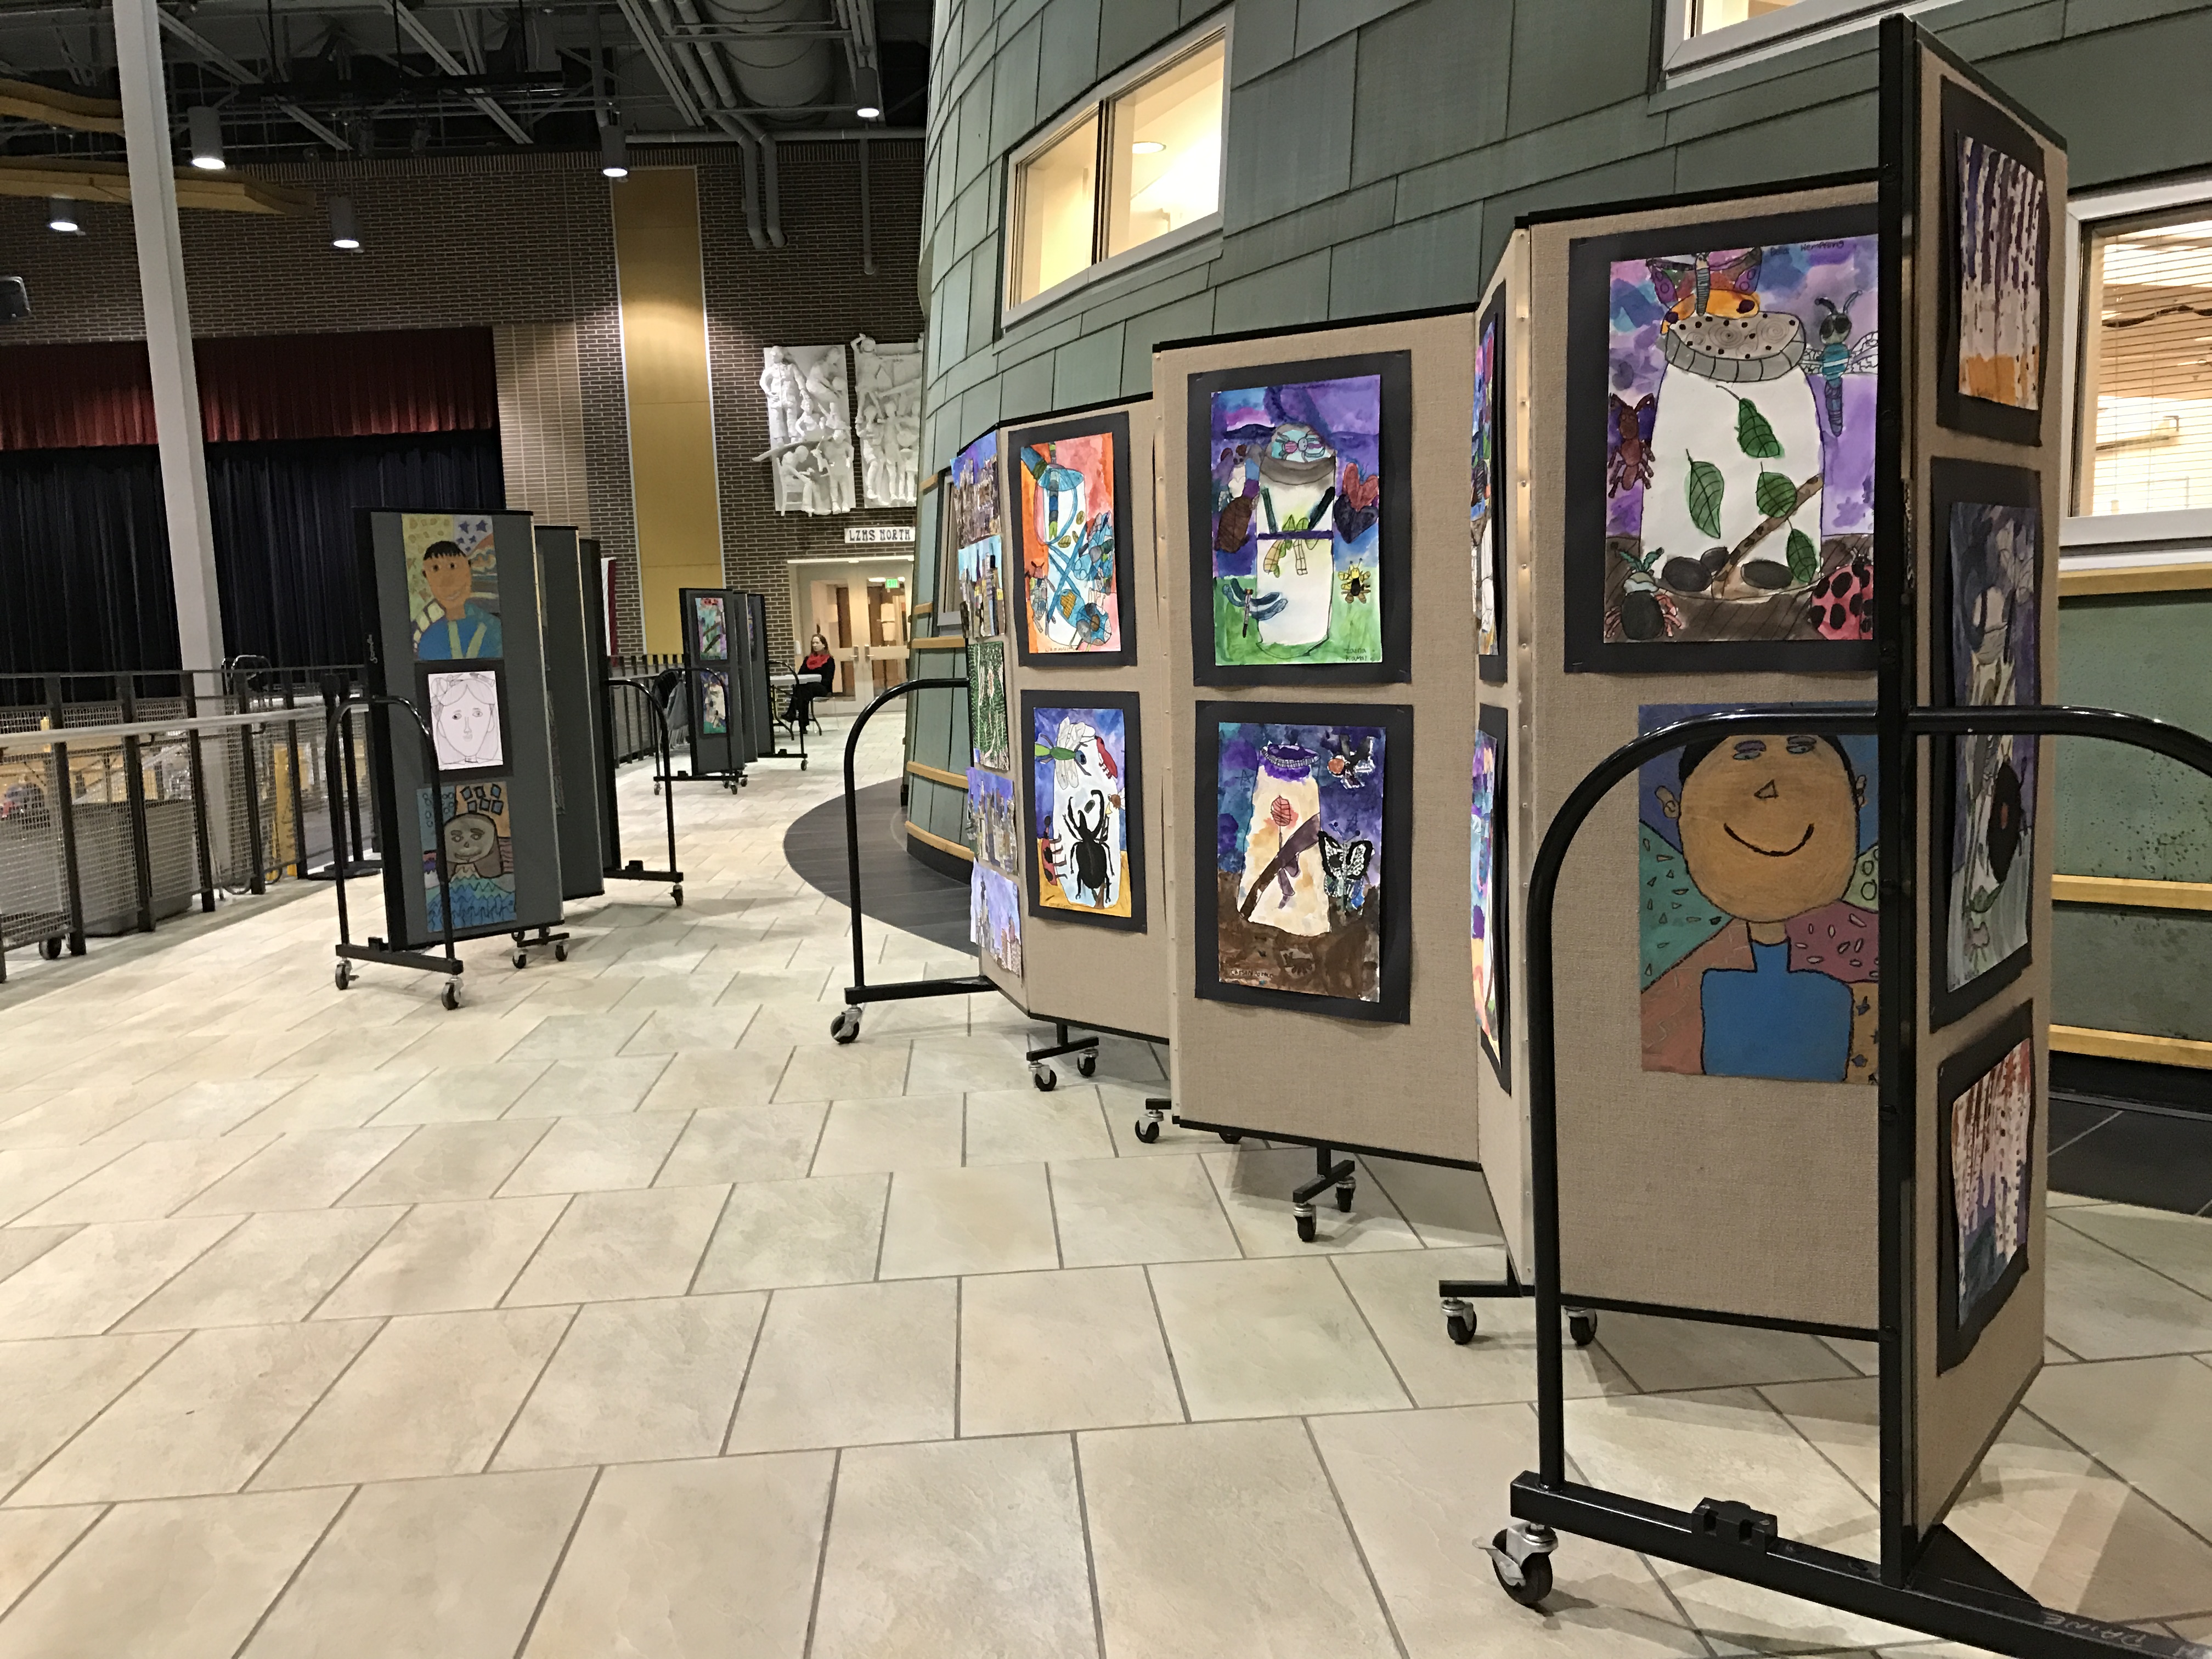 Artwork is displayed on portable partitions in a school